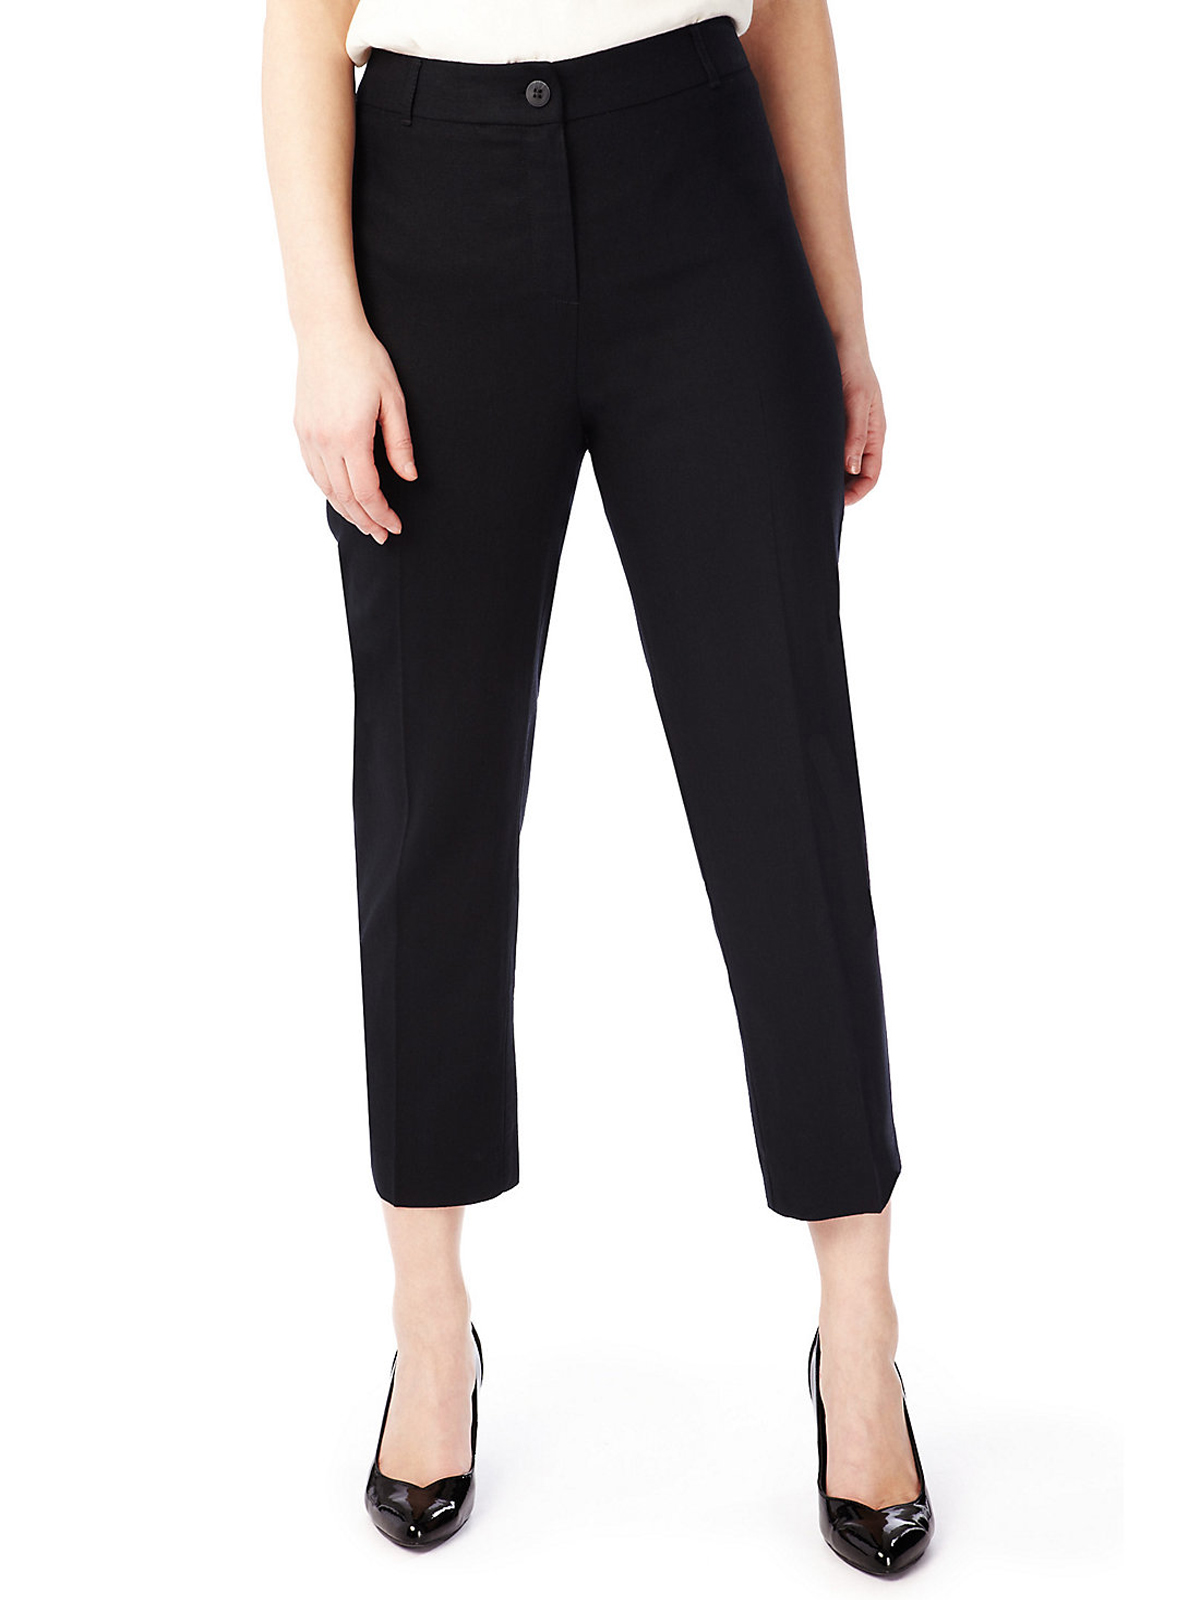 Marks and Spencer - - M&5 ASSORTED Ladies Trousers - Size 8 to 18